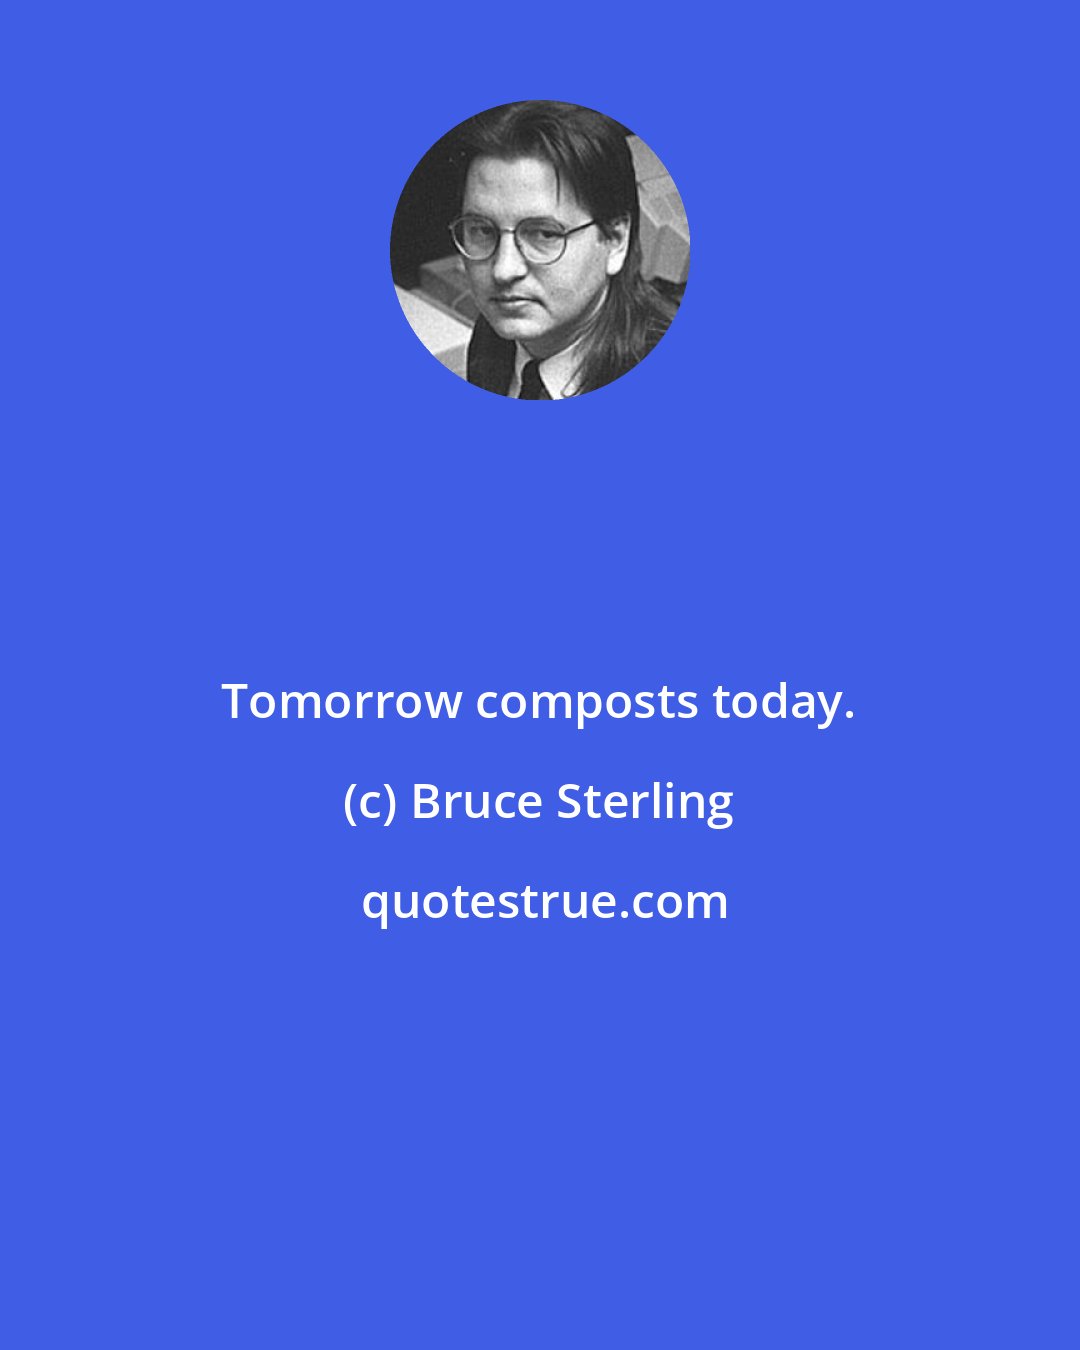 Bruce Sterling: Tomorrow composts today.